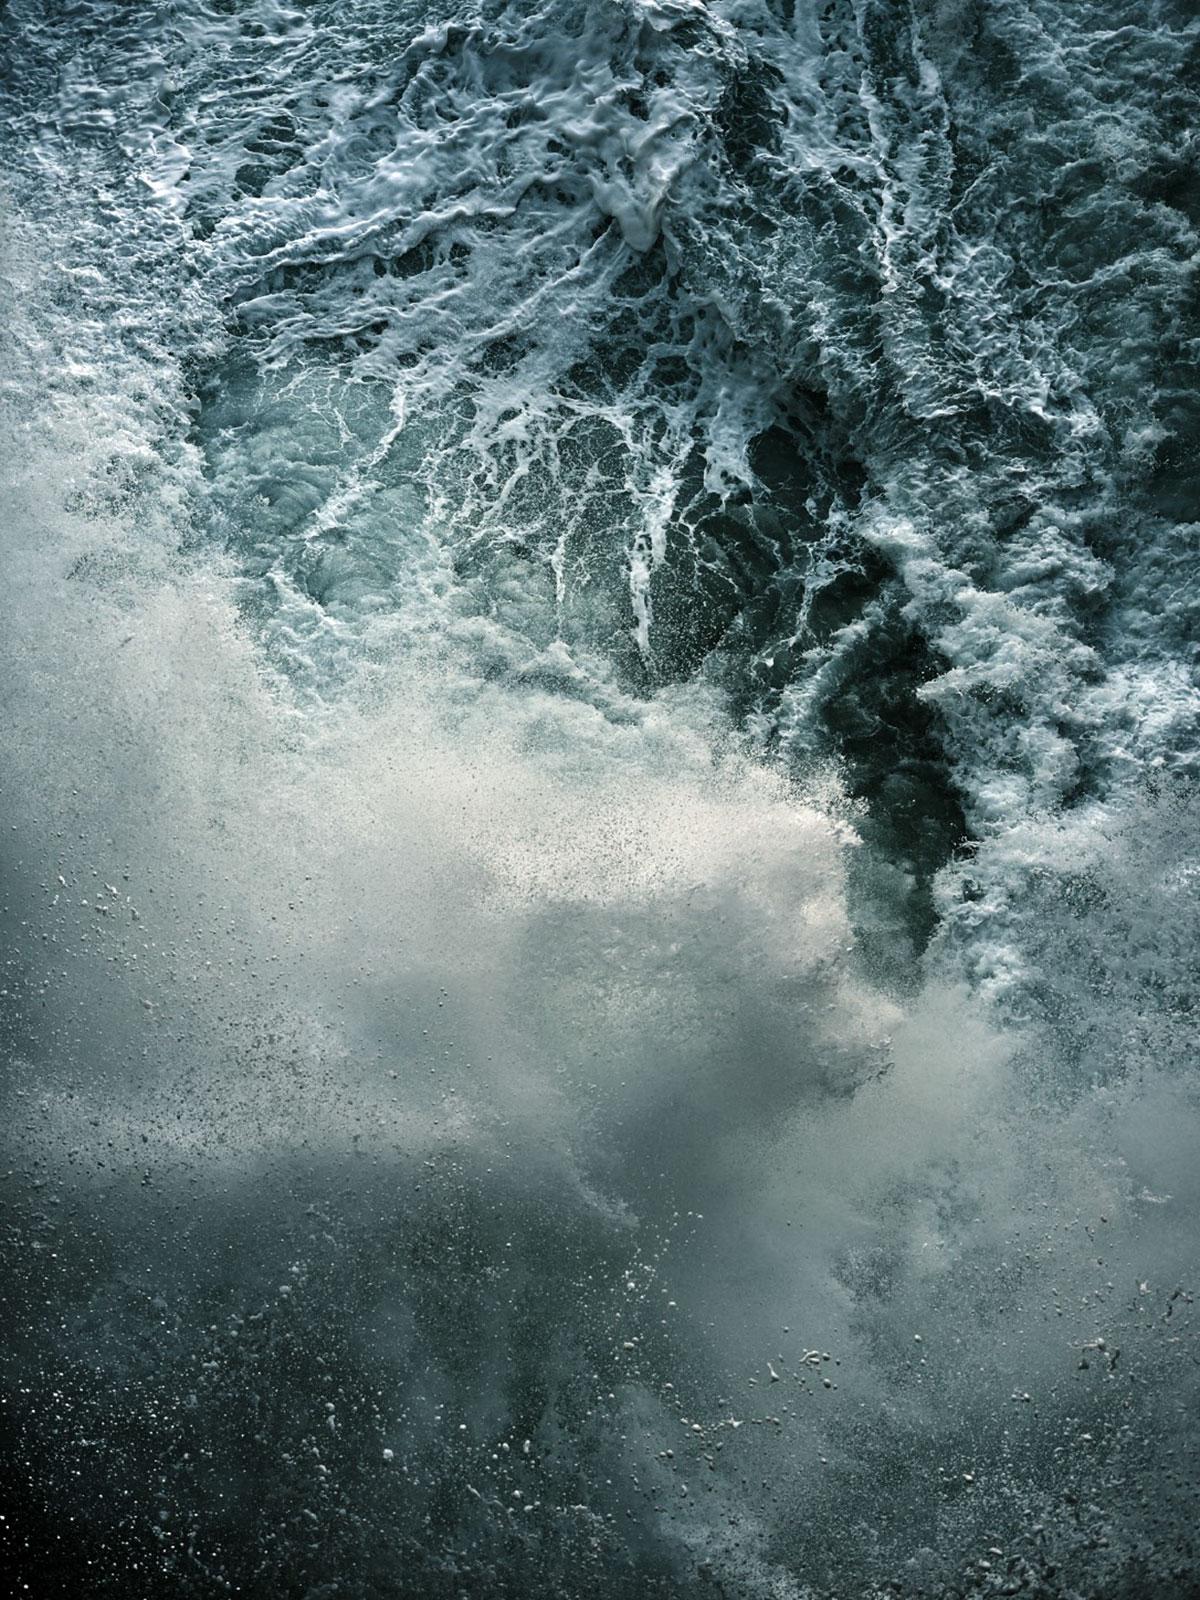 ALESSANDRO PUCCINELLI
FURORE series
Seascape - From the Mare series - Mounted and Framed
Aviailable size:

60 x 48 inches
Edition of 5

Archival Pigment Print

Step into the mesmerizing world of FURORE, the latest masterpiece series by Italian